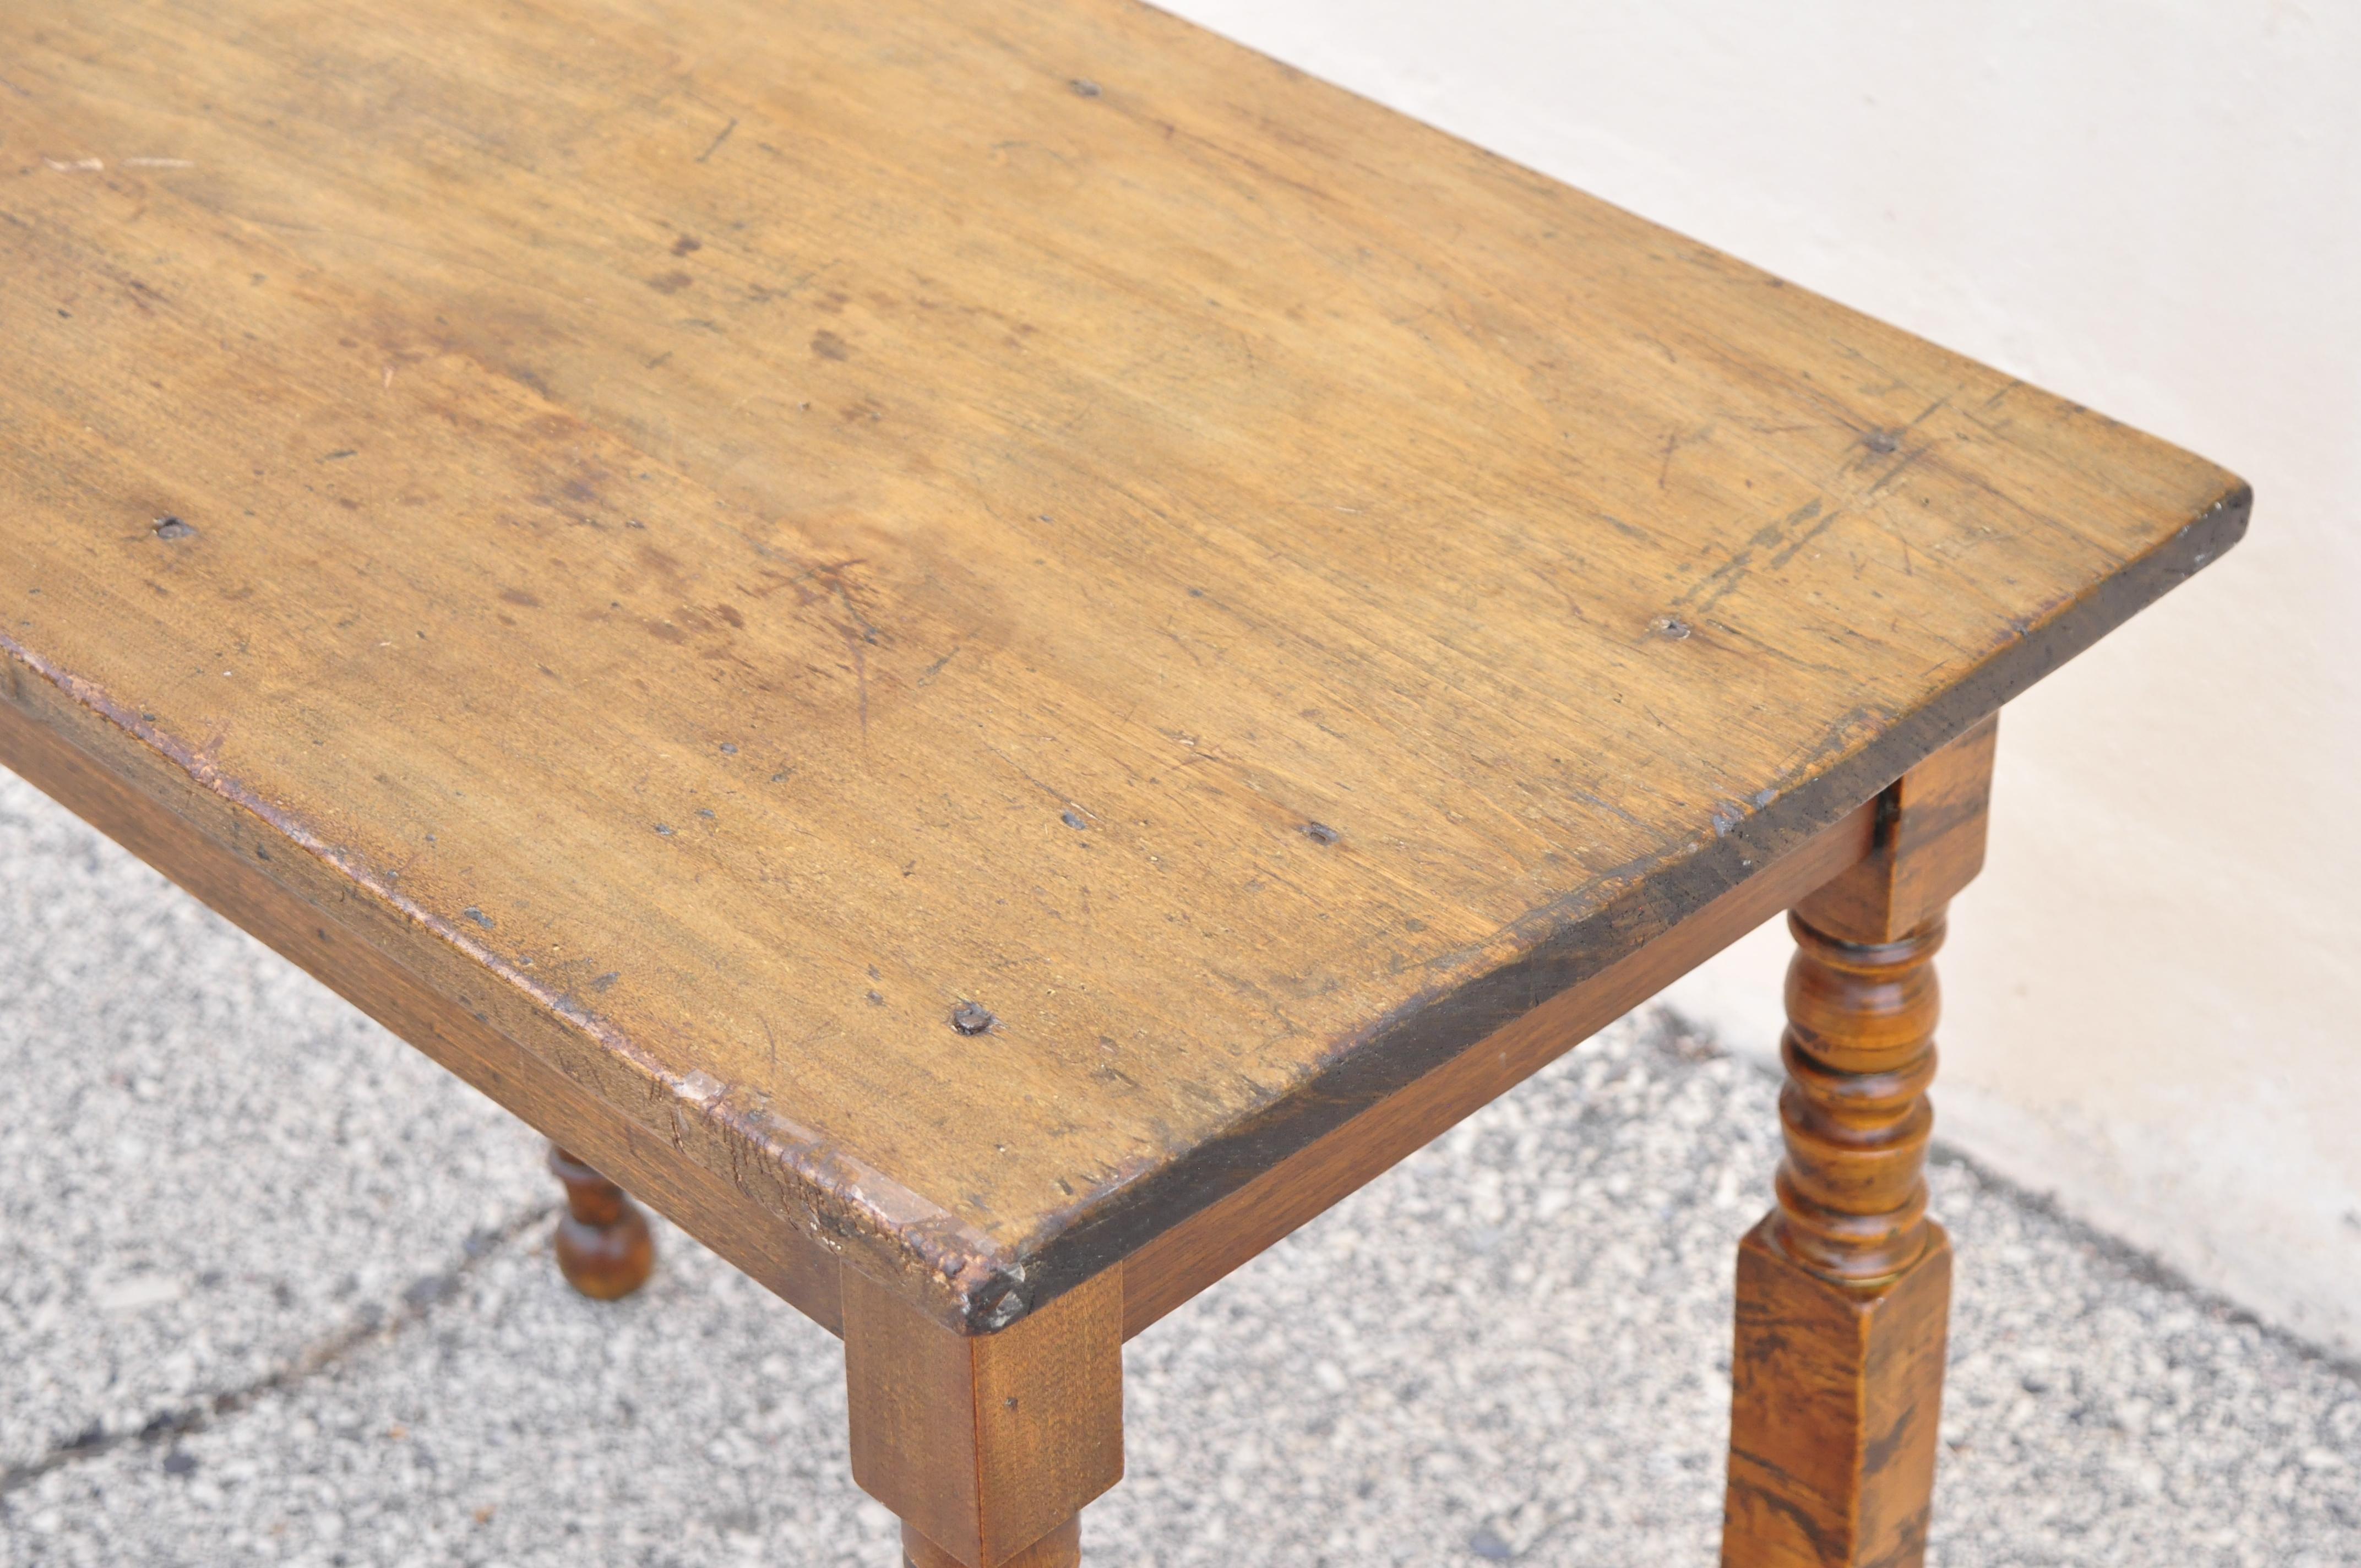 20th Century 19th American Colonial Walnut Maple Small Desk Side Table with Turn Carved Legs